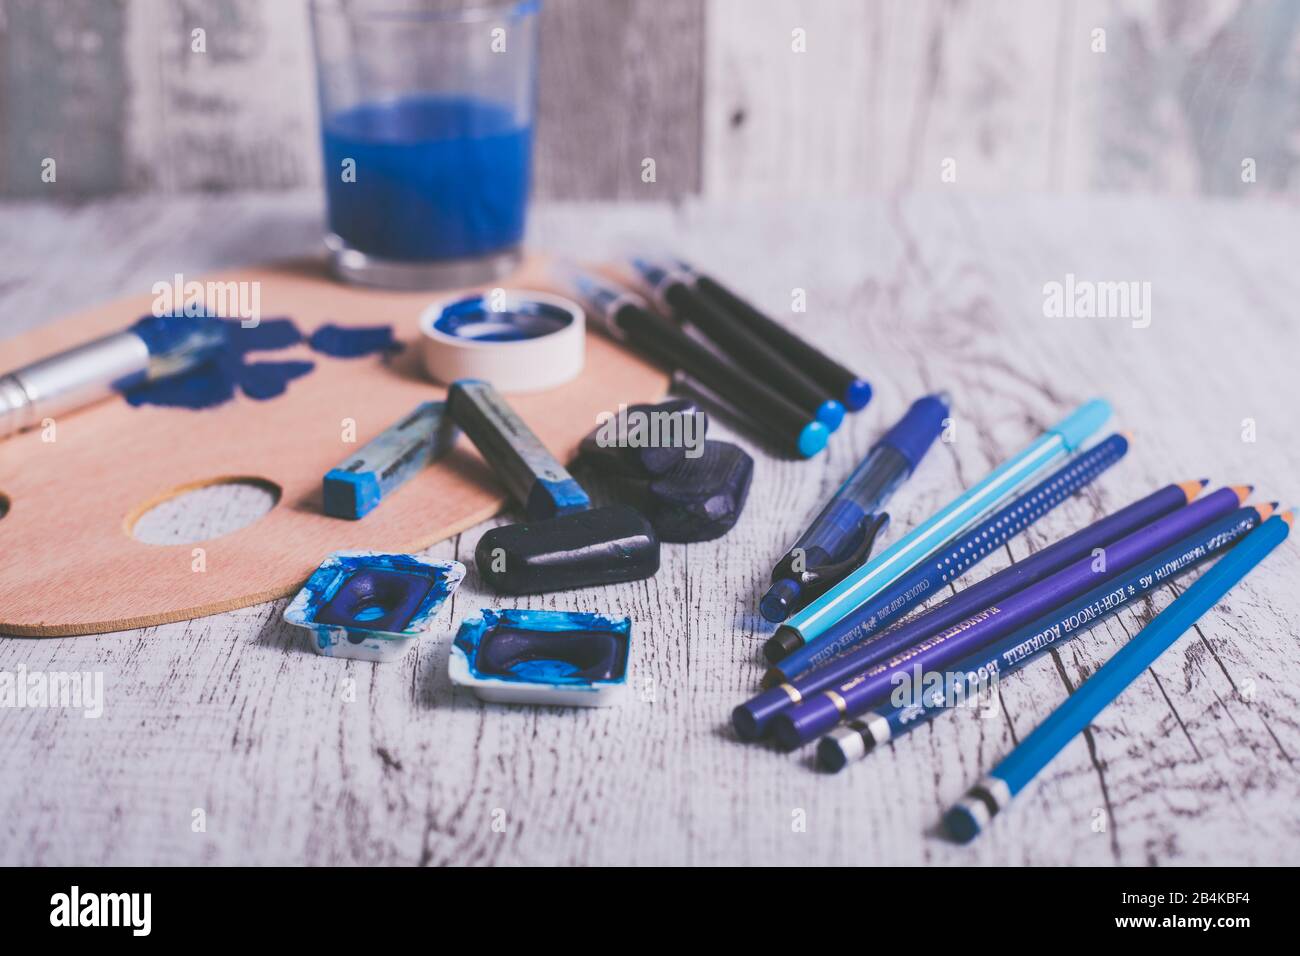 Arrangement of different pens and painting utensils in the color blue Stock Photo